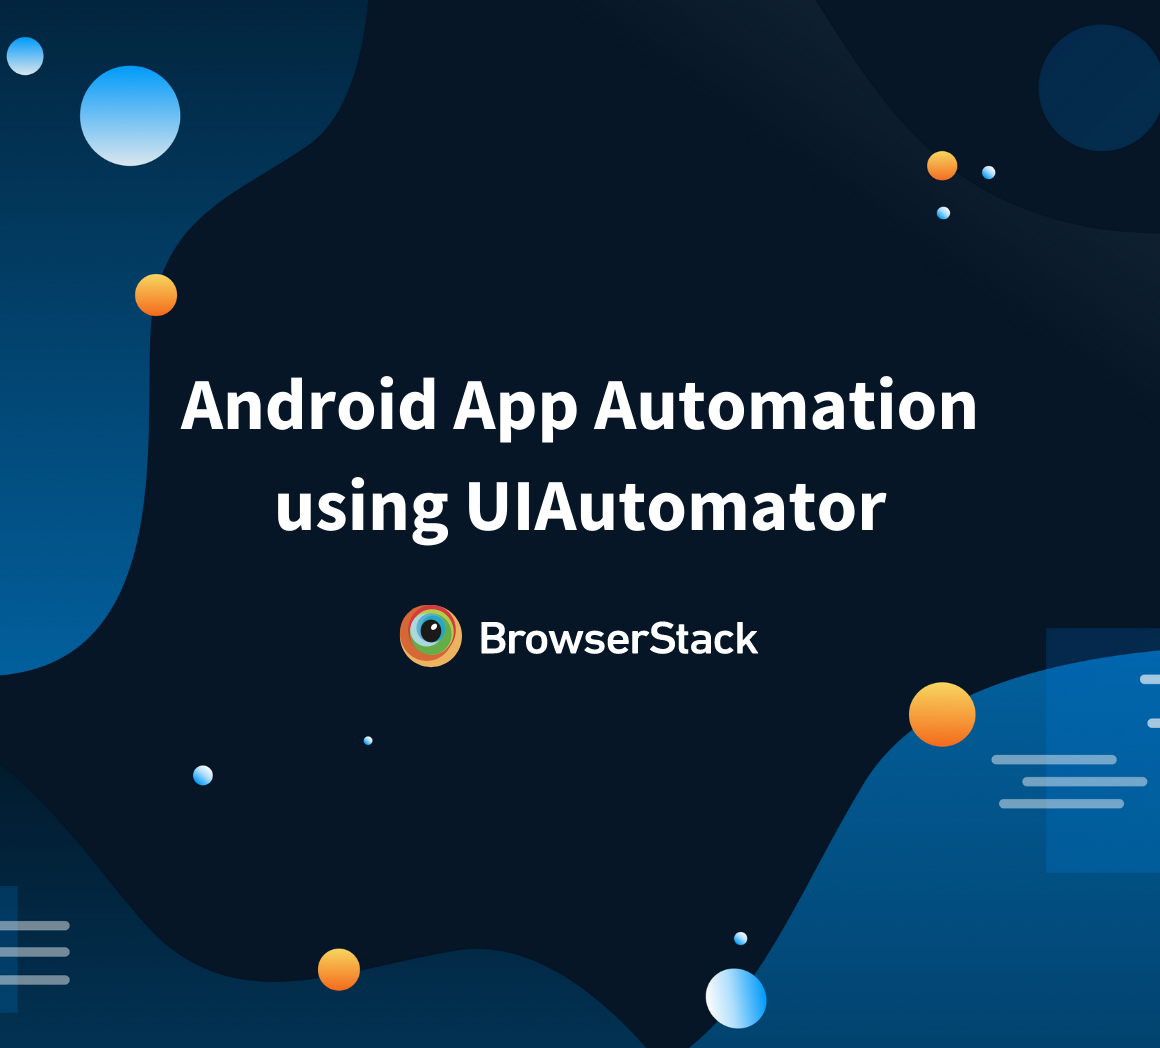 Android App Automation using UIAutomator